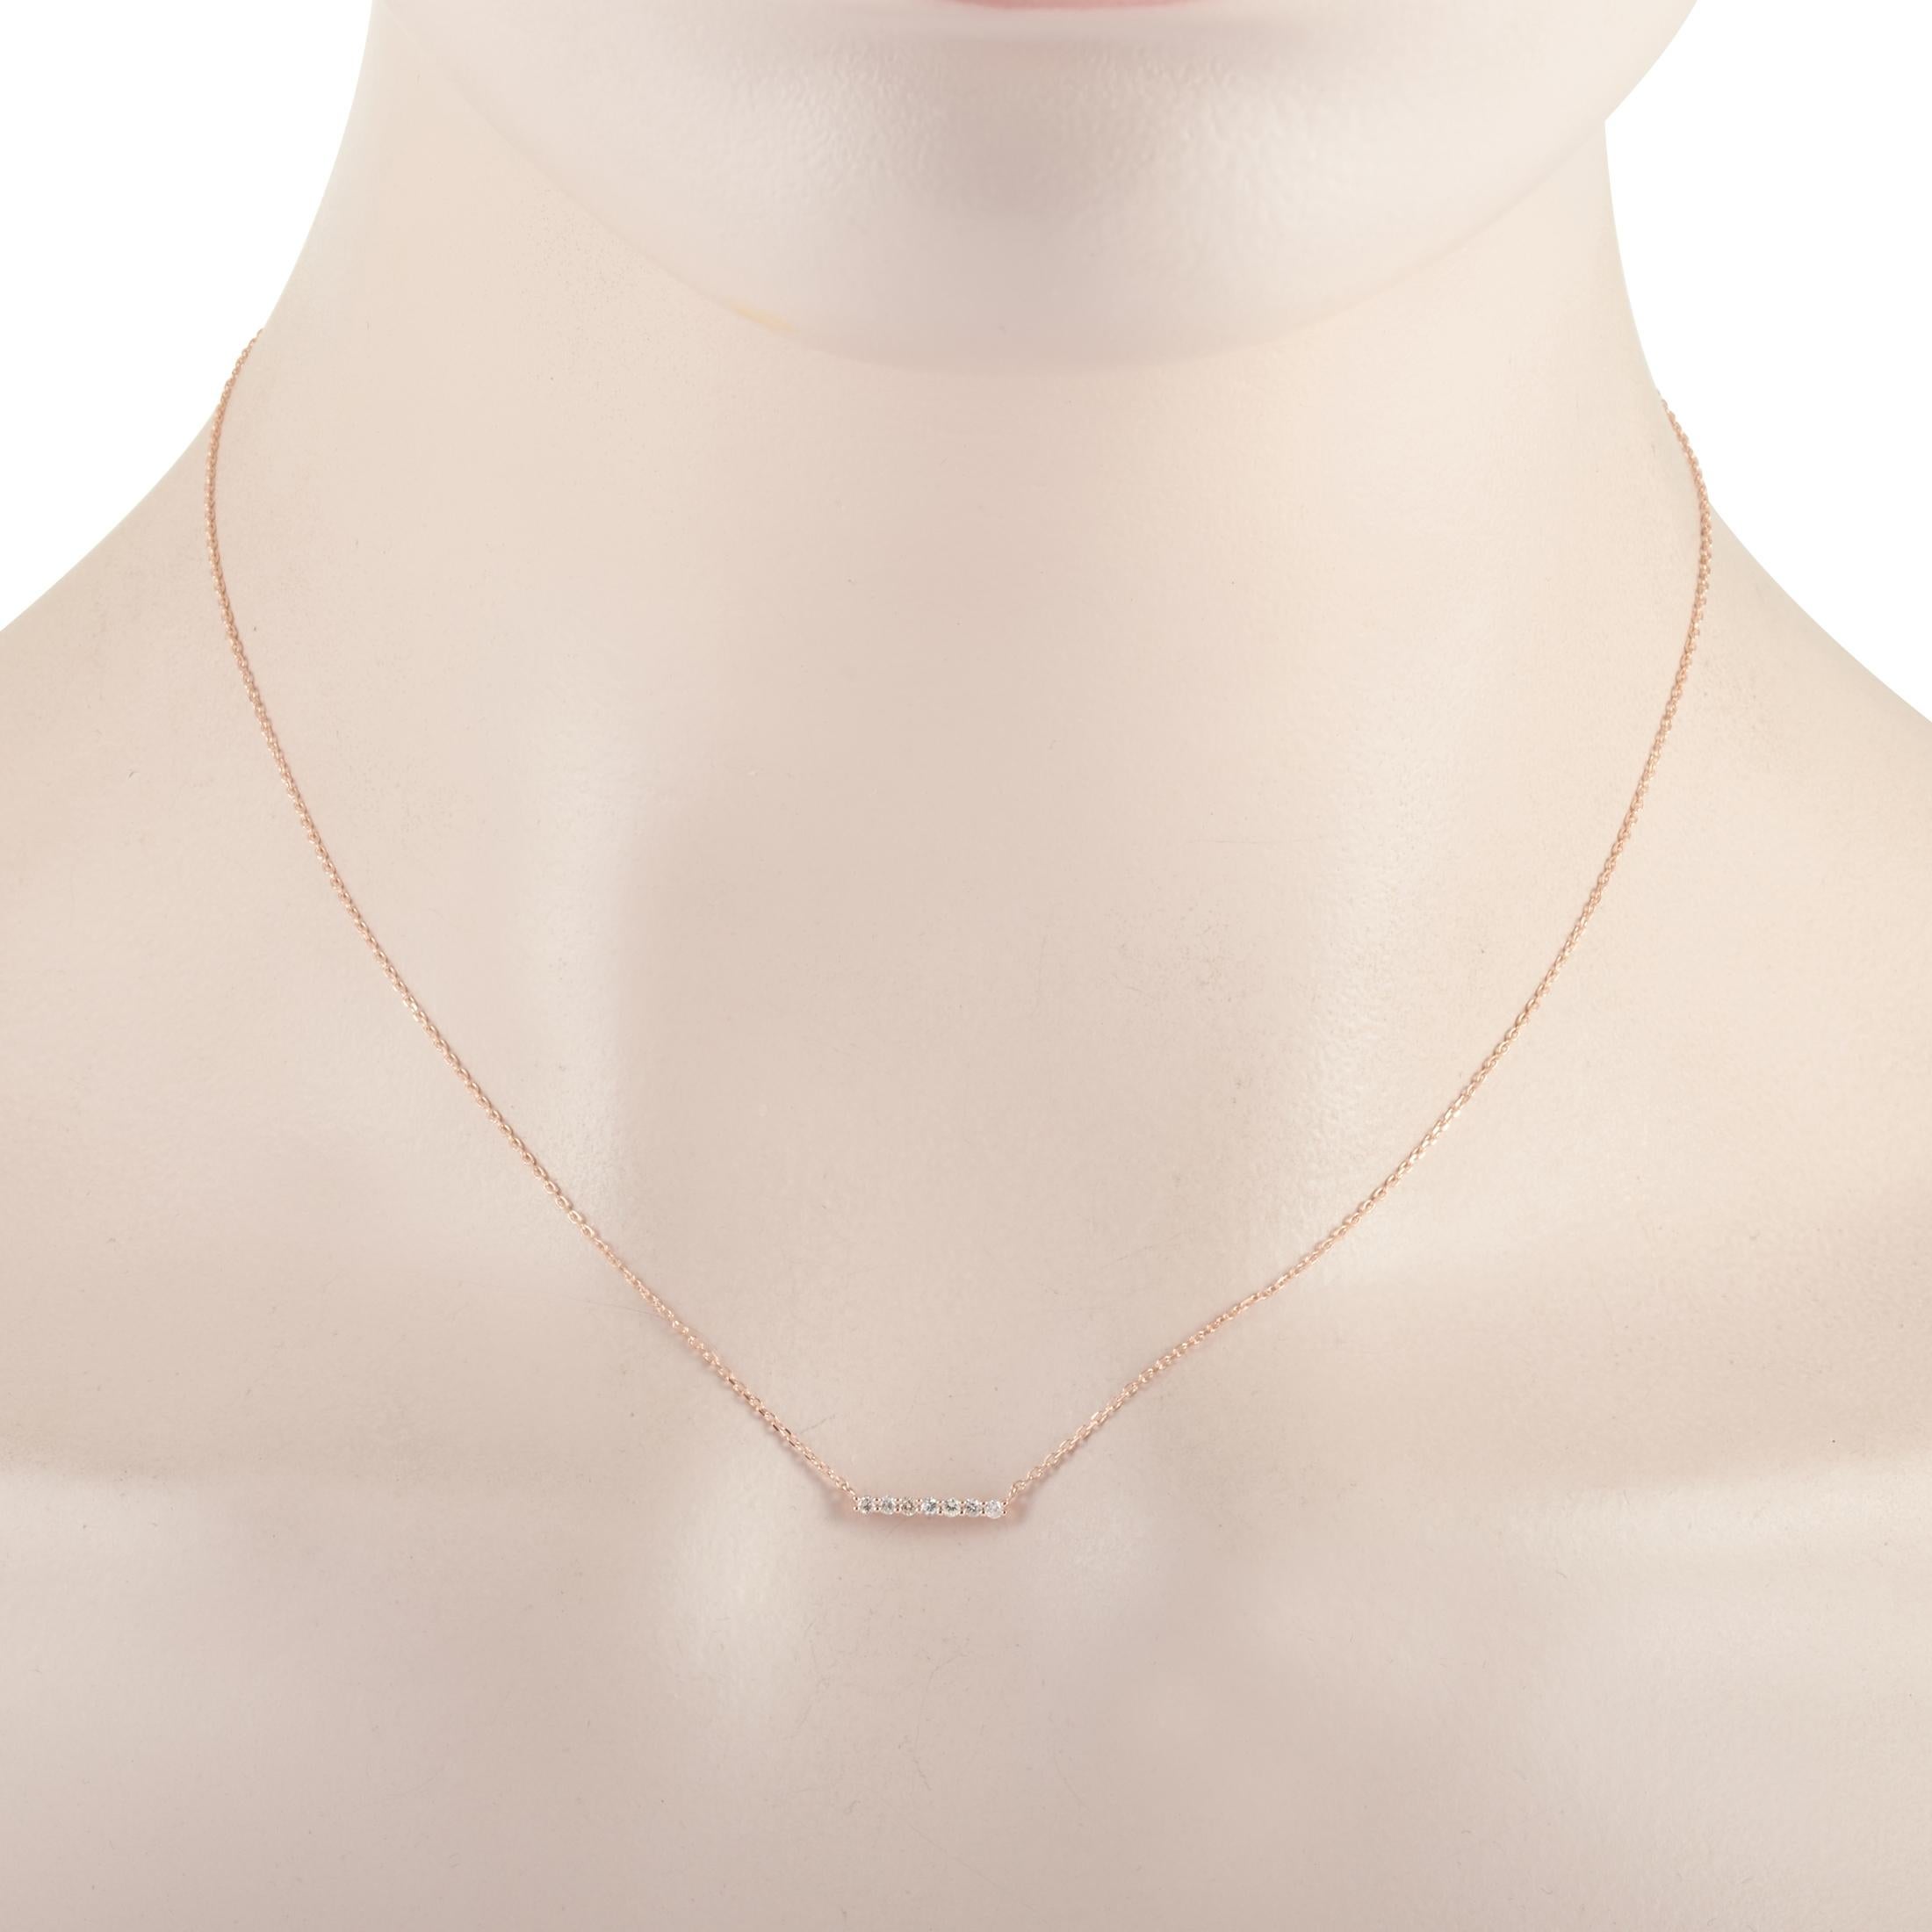 This LB Exclusive necklace is crafted from 14K rose gold and weighs 1.3 grams. It is presented with a 15” chain and boasts a pendant that measures 0.07” in length and 0.44” in width. The necklace is set with diamonds that total 0.10 carats.
 
